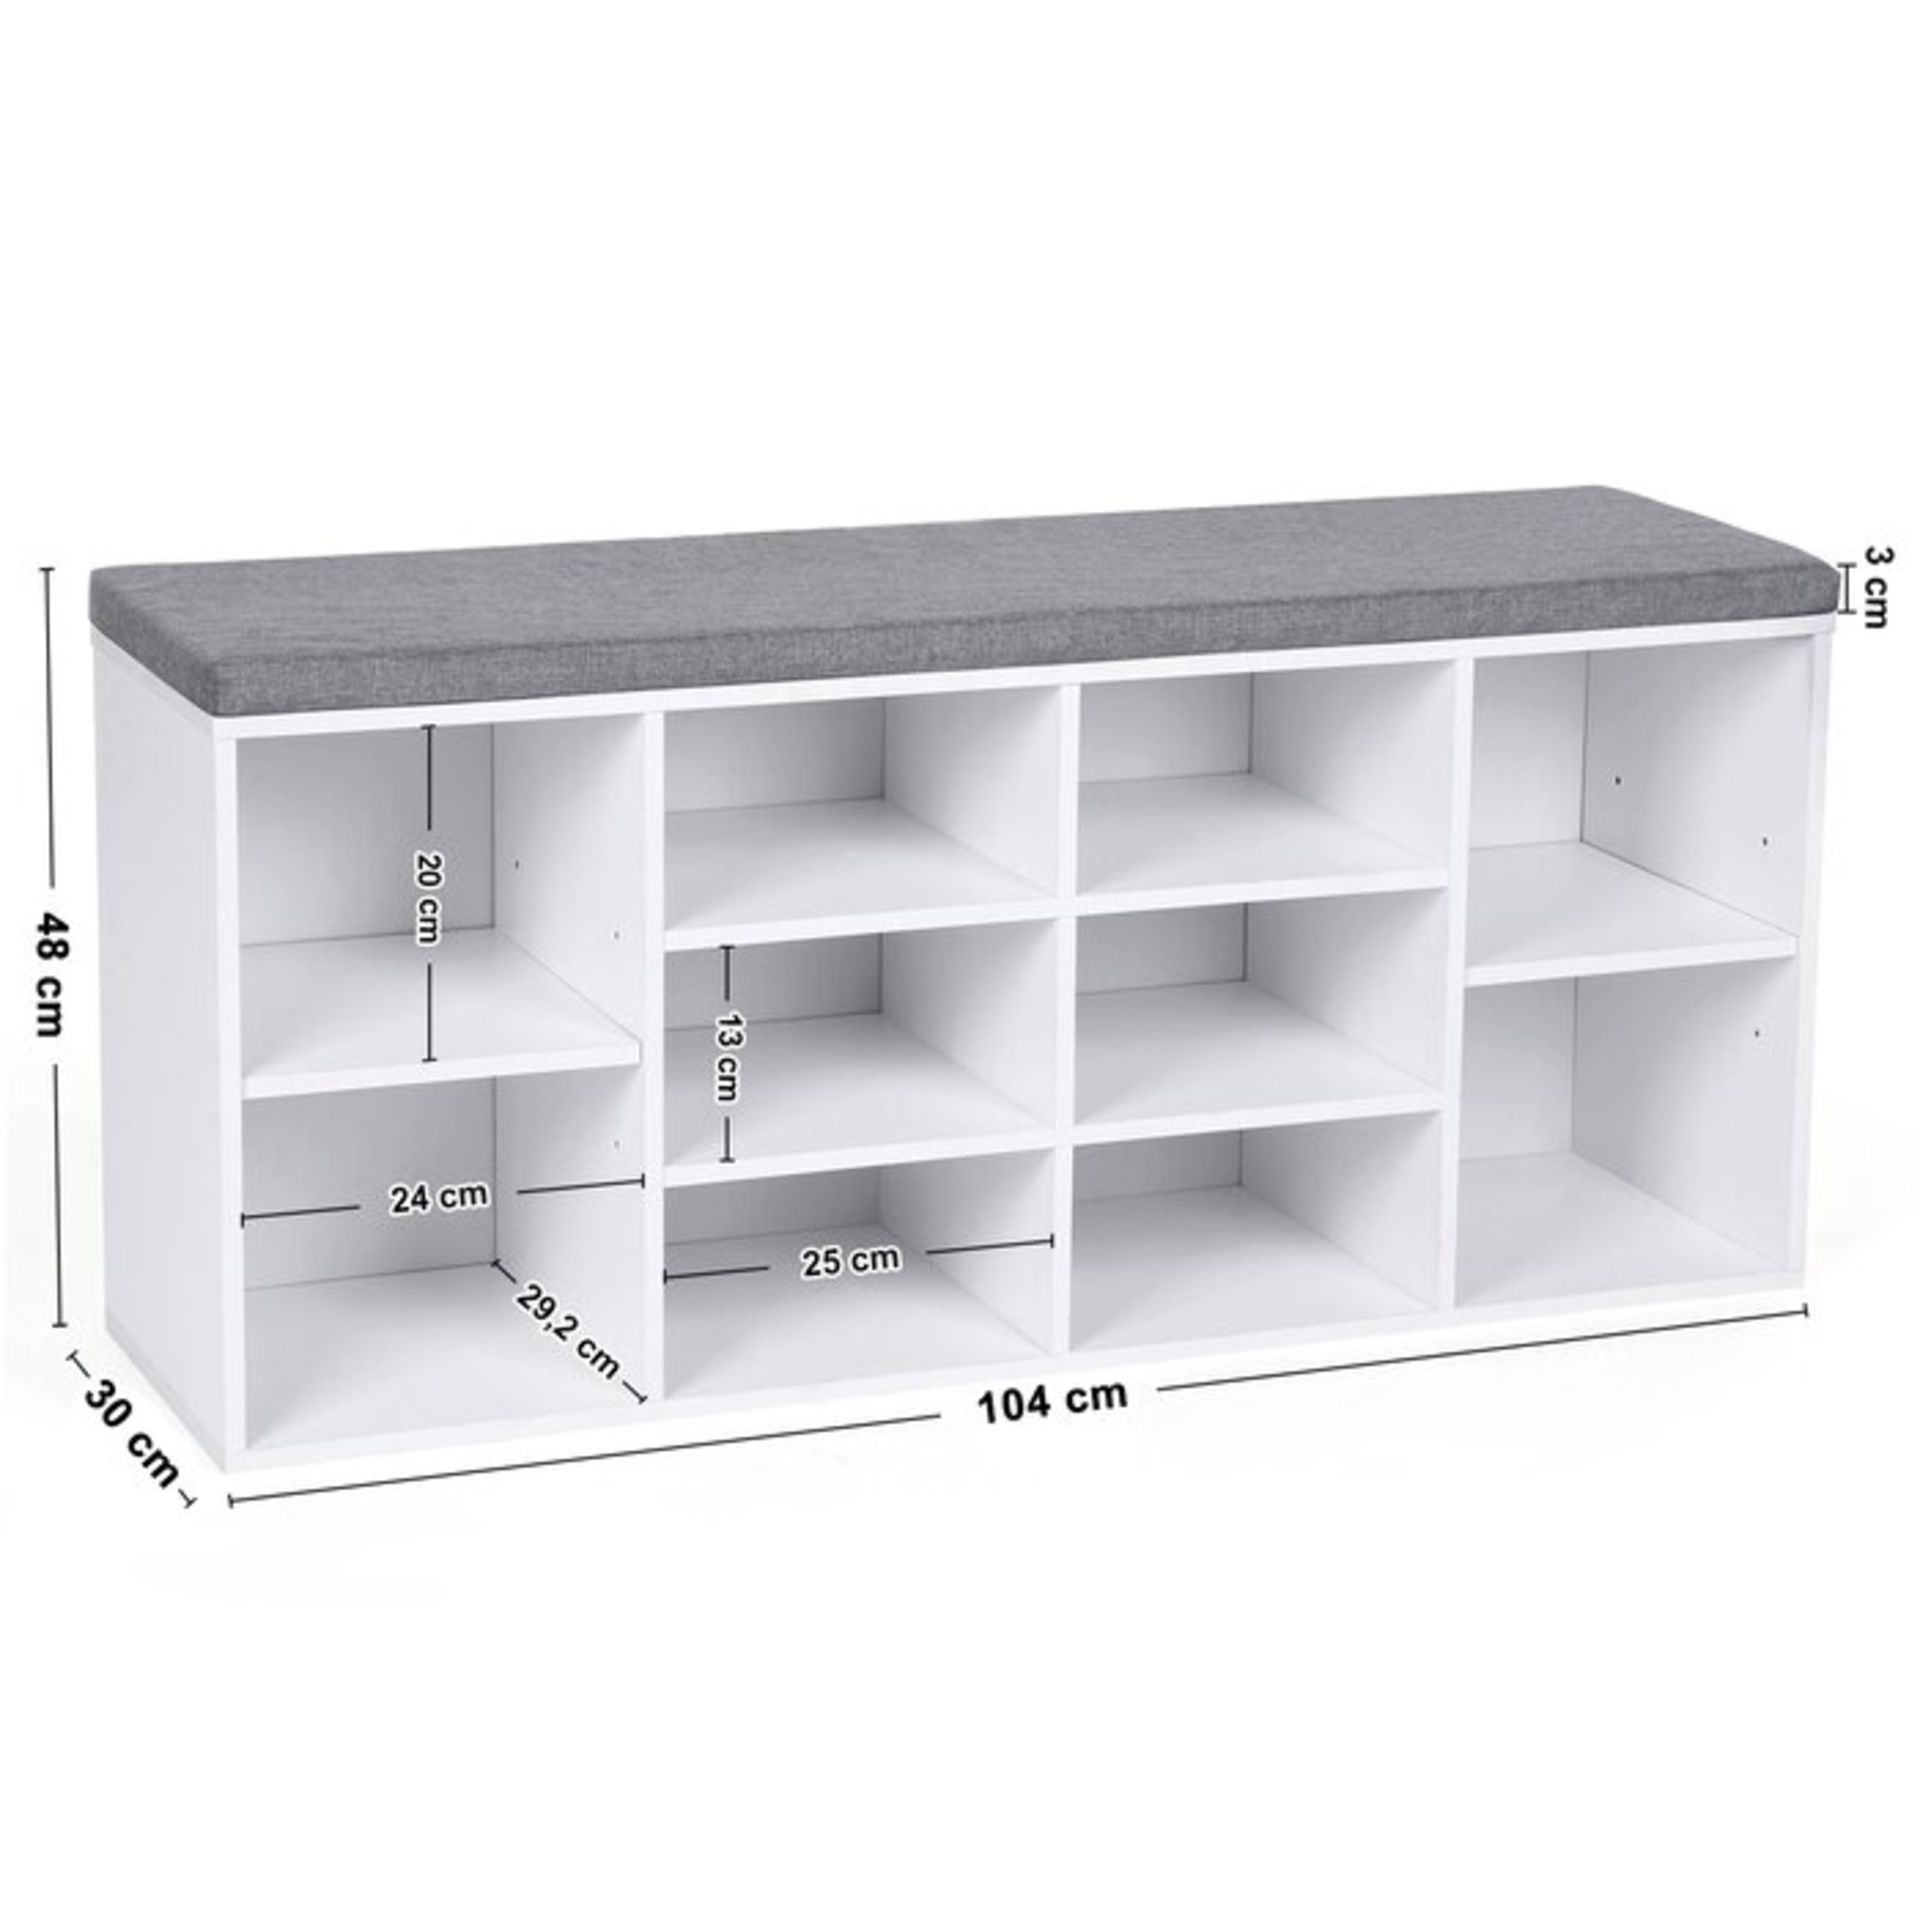 Shoes Storage Bench - RRP £65.99 - Image 3 of 3